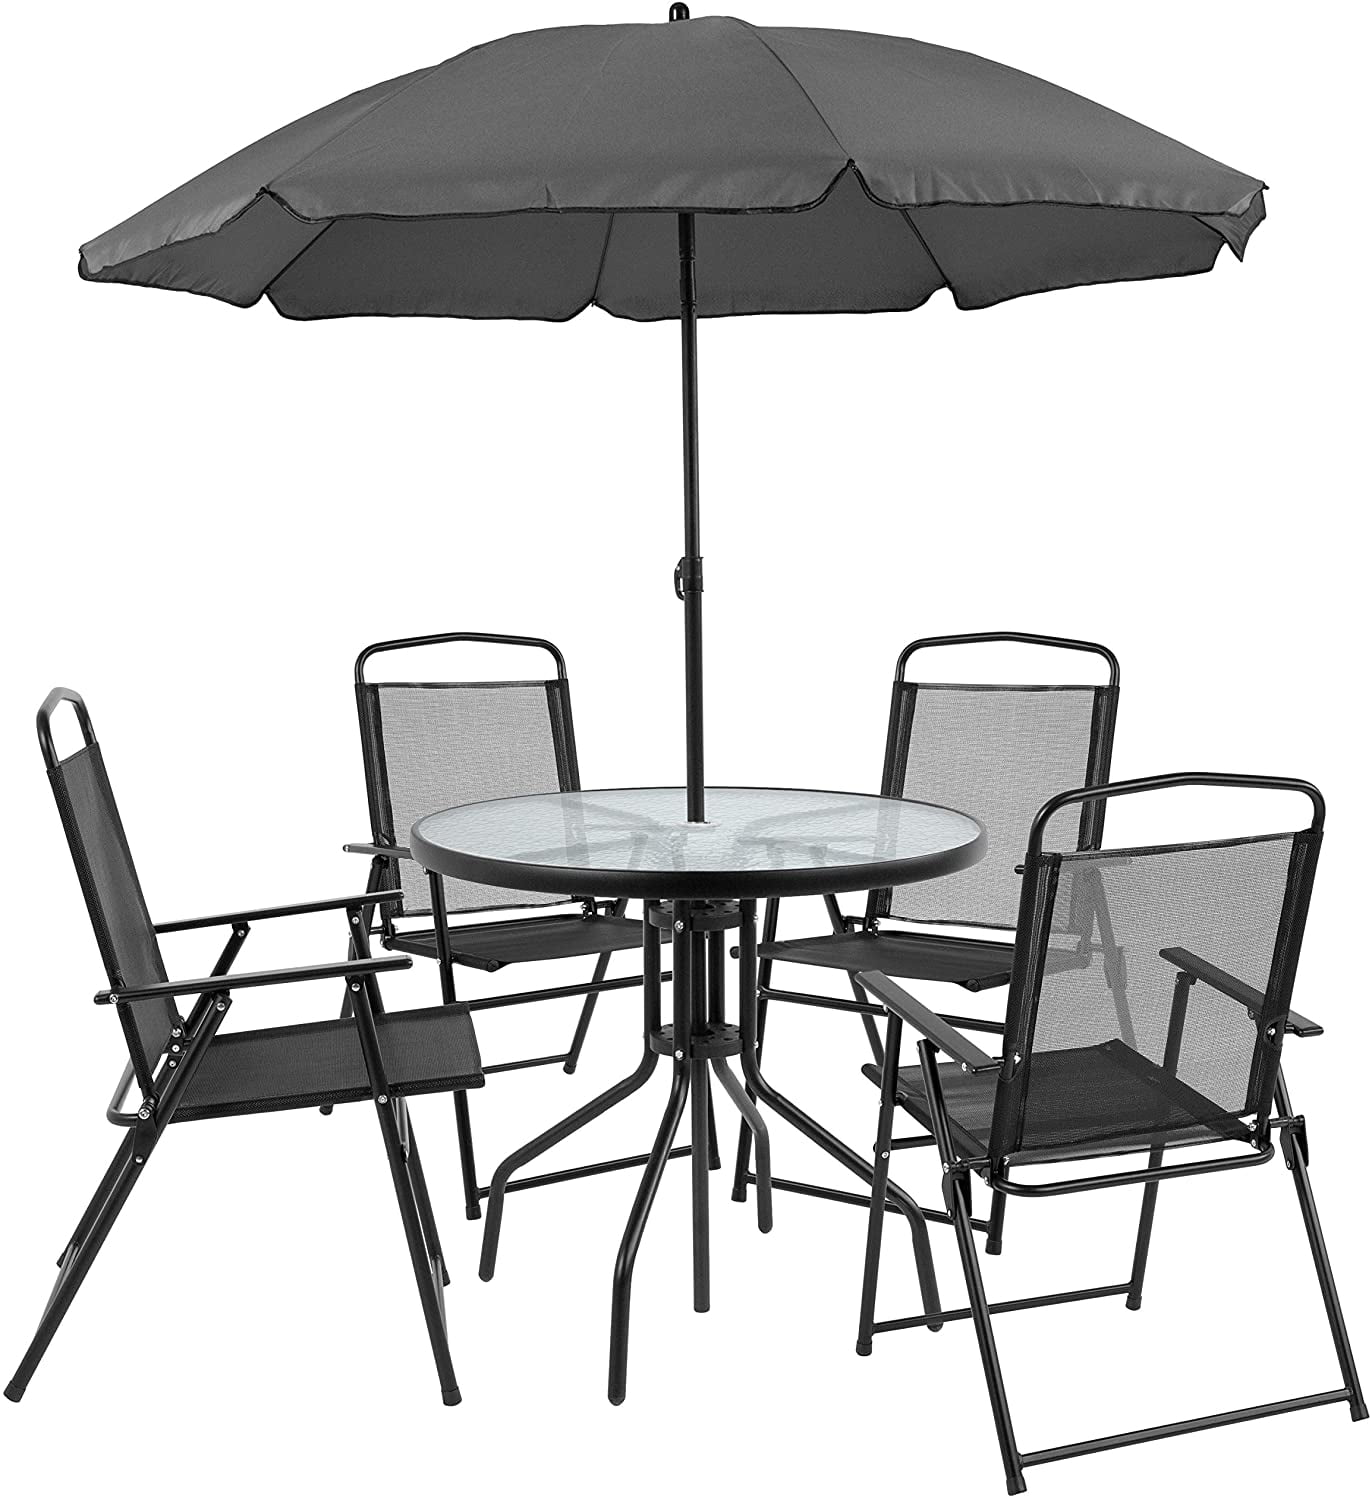 Flash Furniture Nantucket 6 Piece Black Patio Garden Set With Table Umbrella And 4 Folding Chairs Com - Plastic Patio Table And Chairs With Umbrella Hole